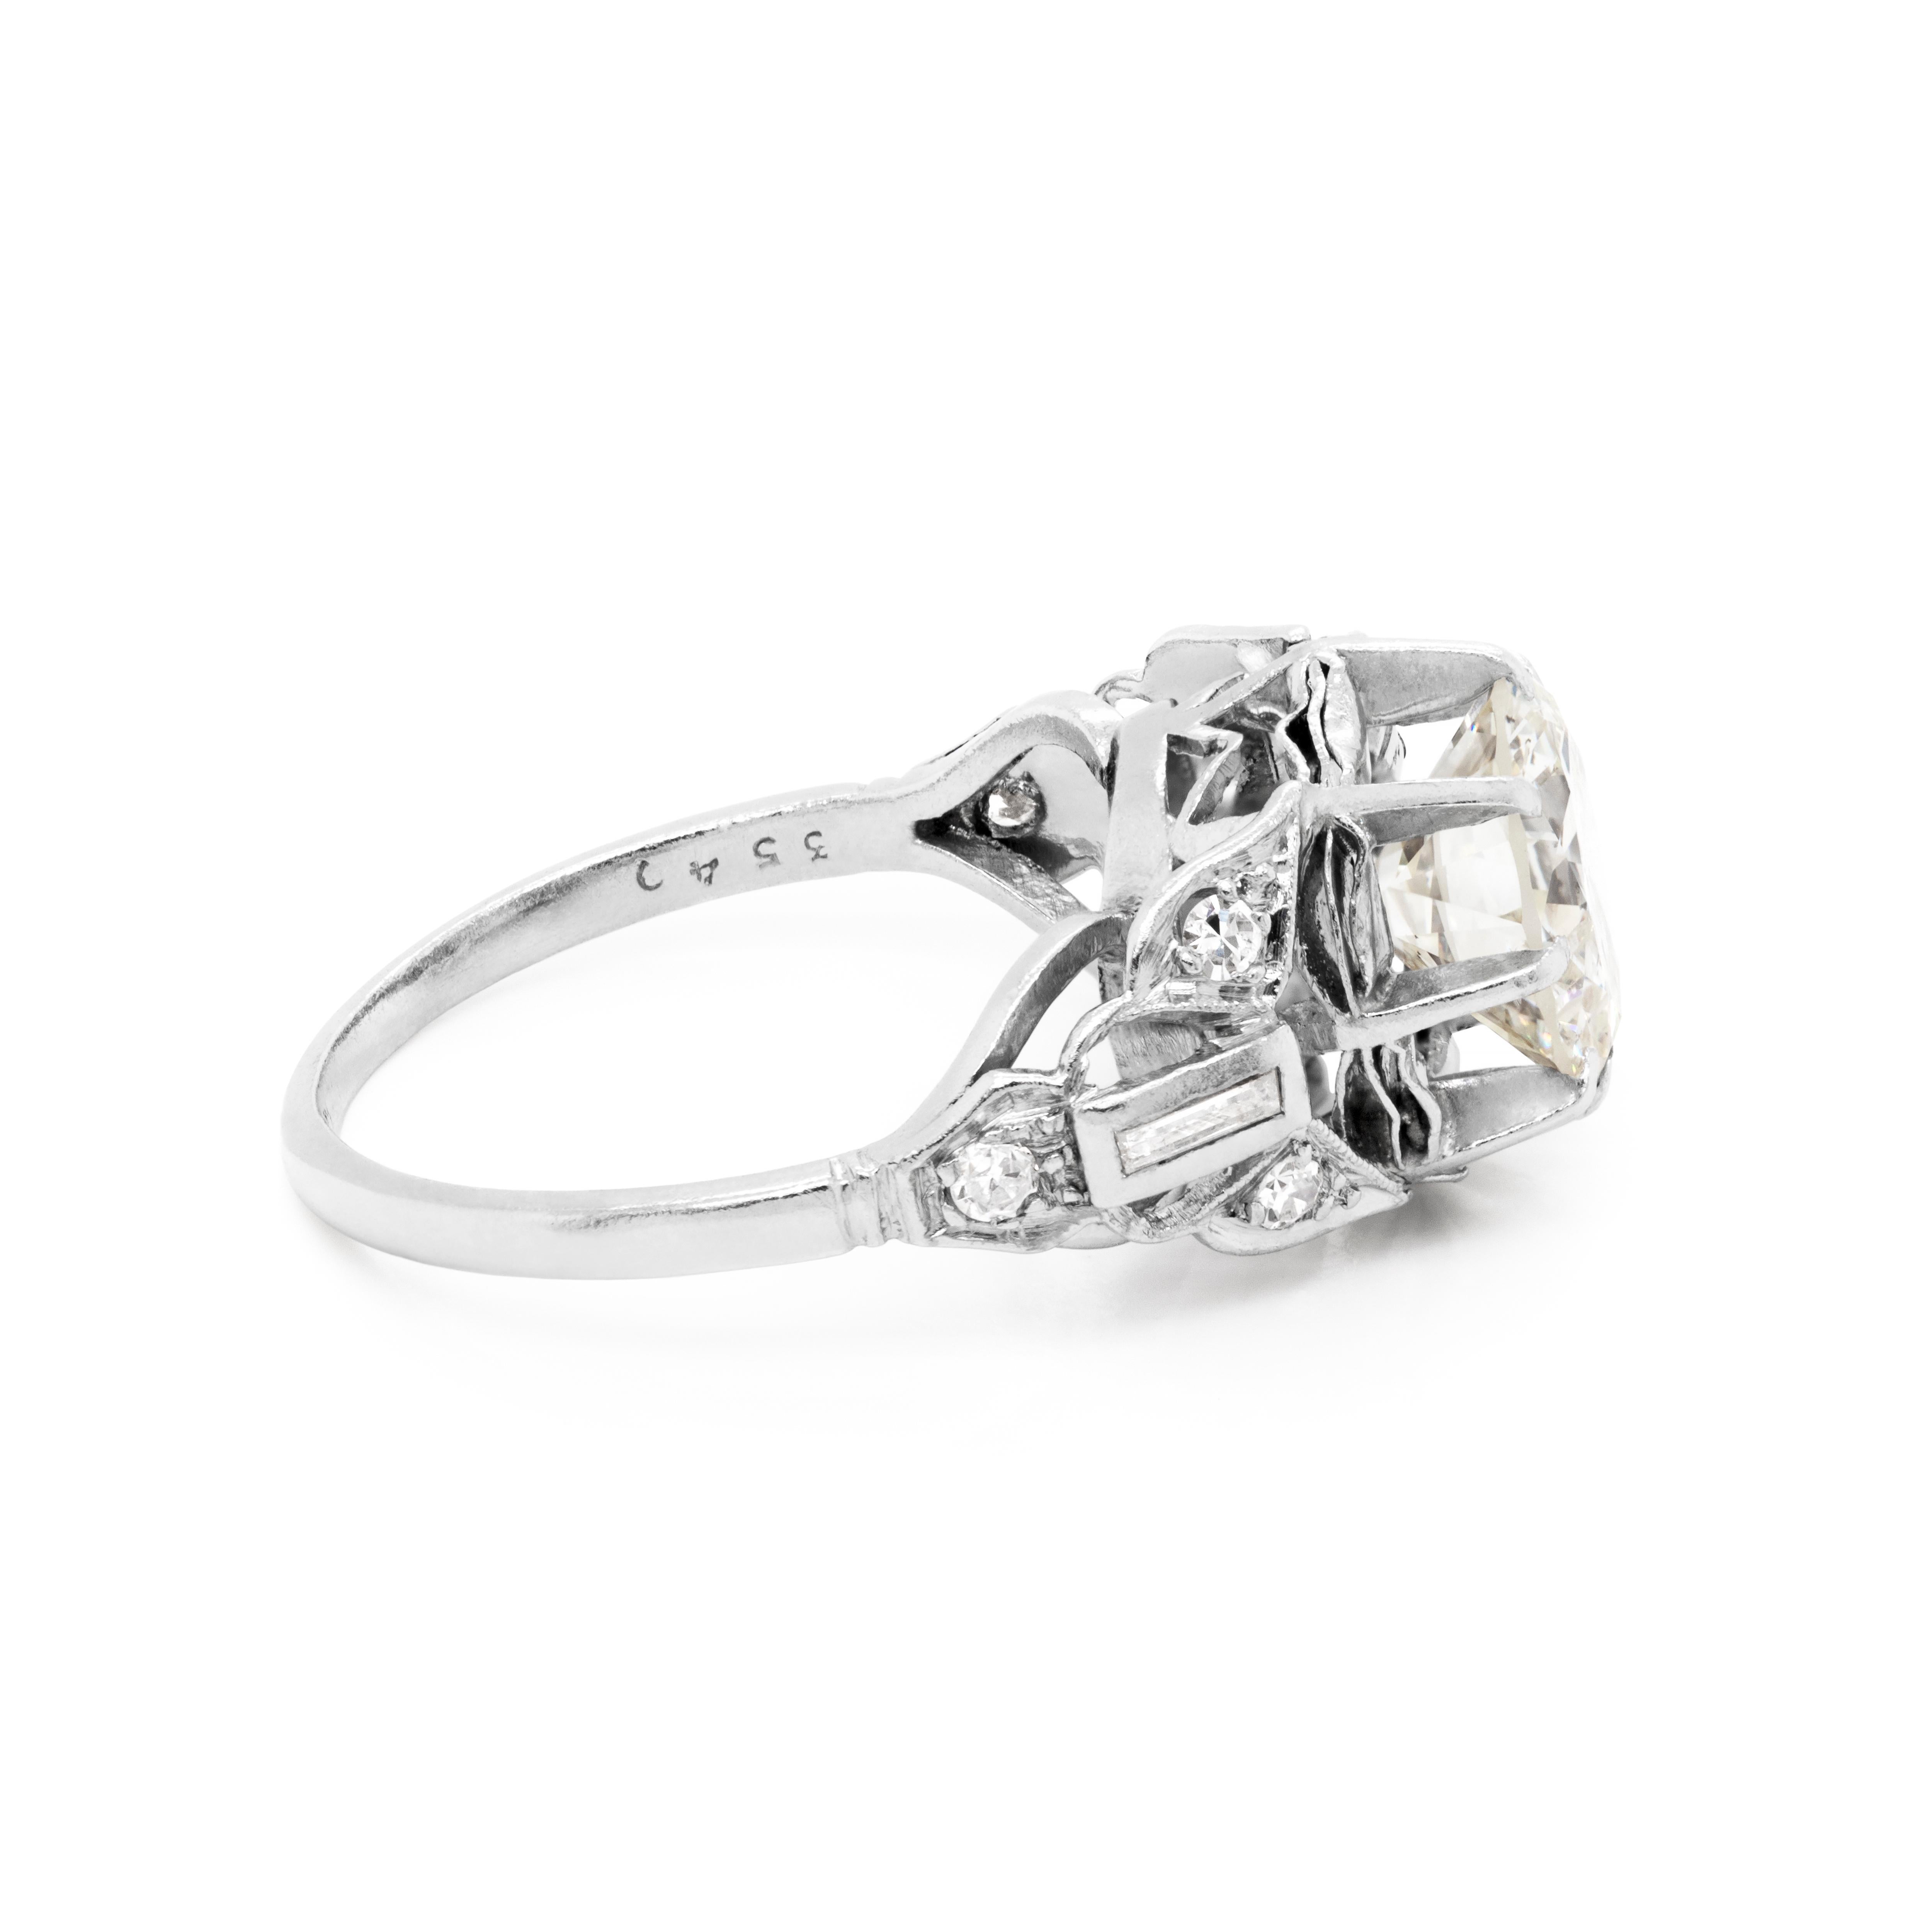 Original Edwardian handmade engagement ring featuring a 2.11 carat transitional cut diamond set in an open work, elevated eight claw setting. This incredible ring is intricately designed with open work shoulders, rubover  set with a baguette cut